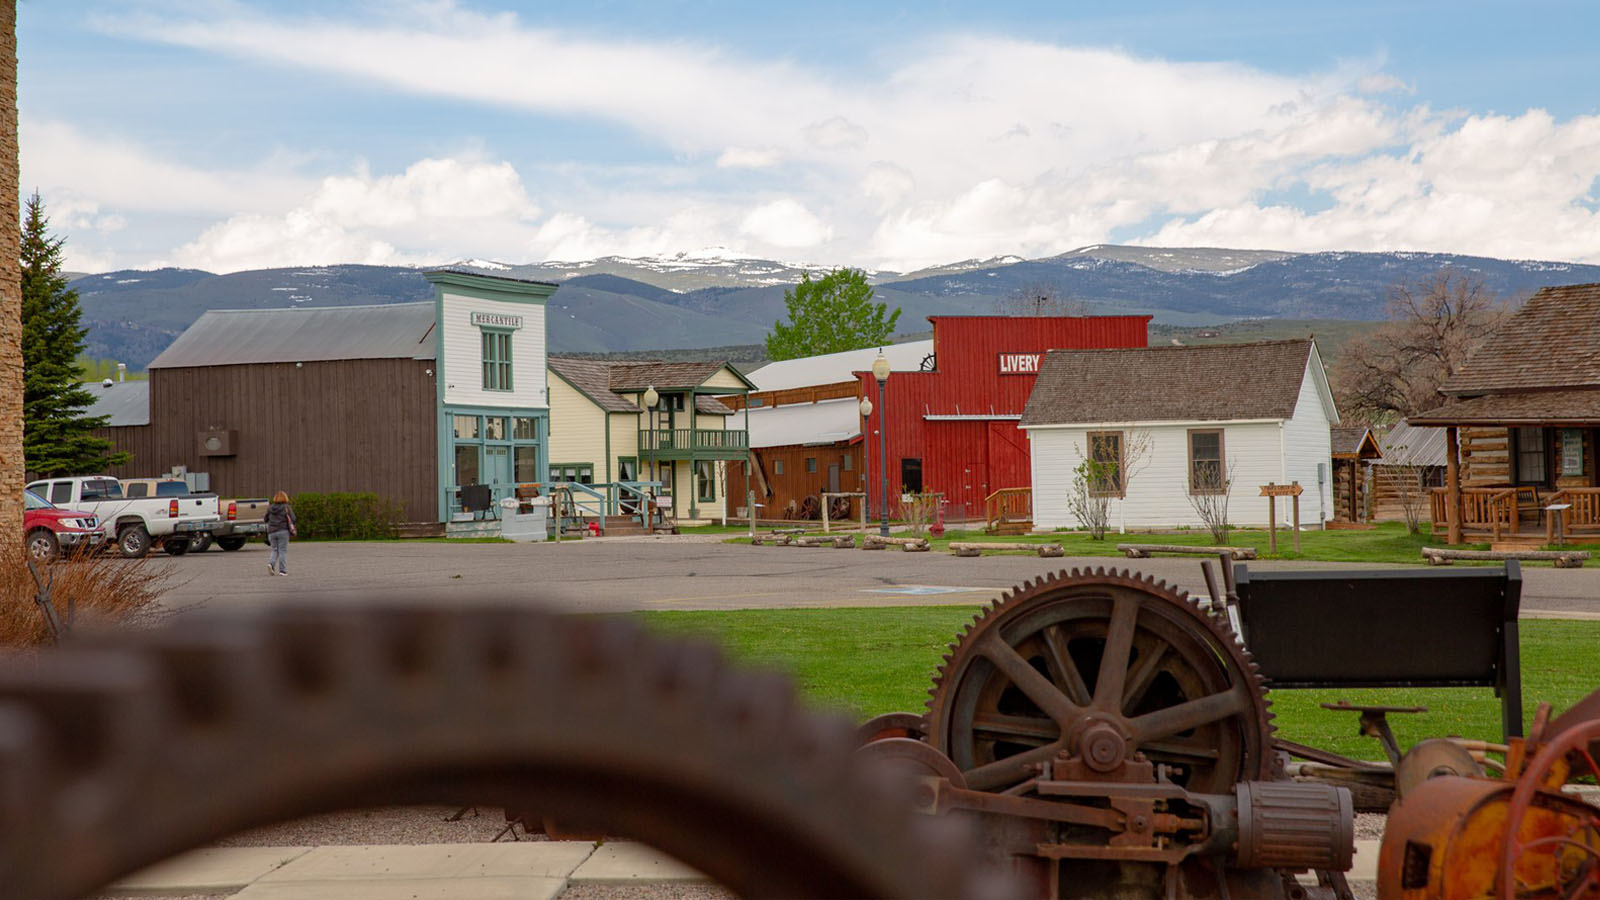 Museum of the American West in Lander WY